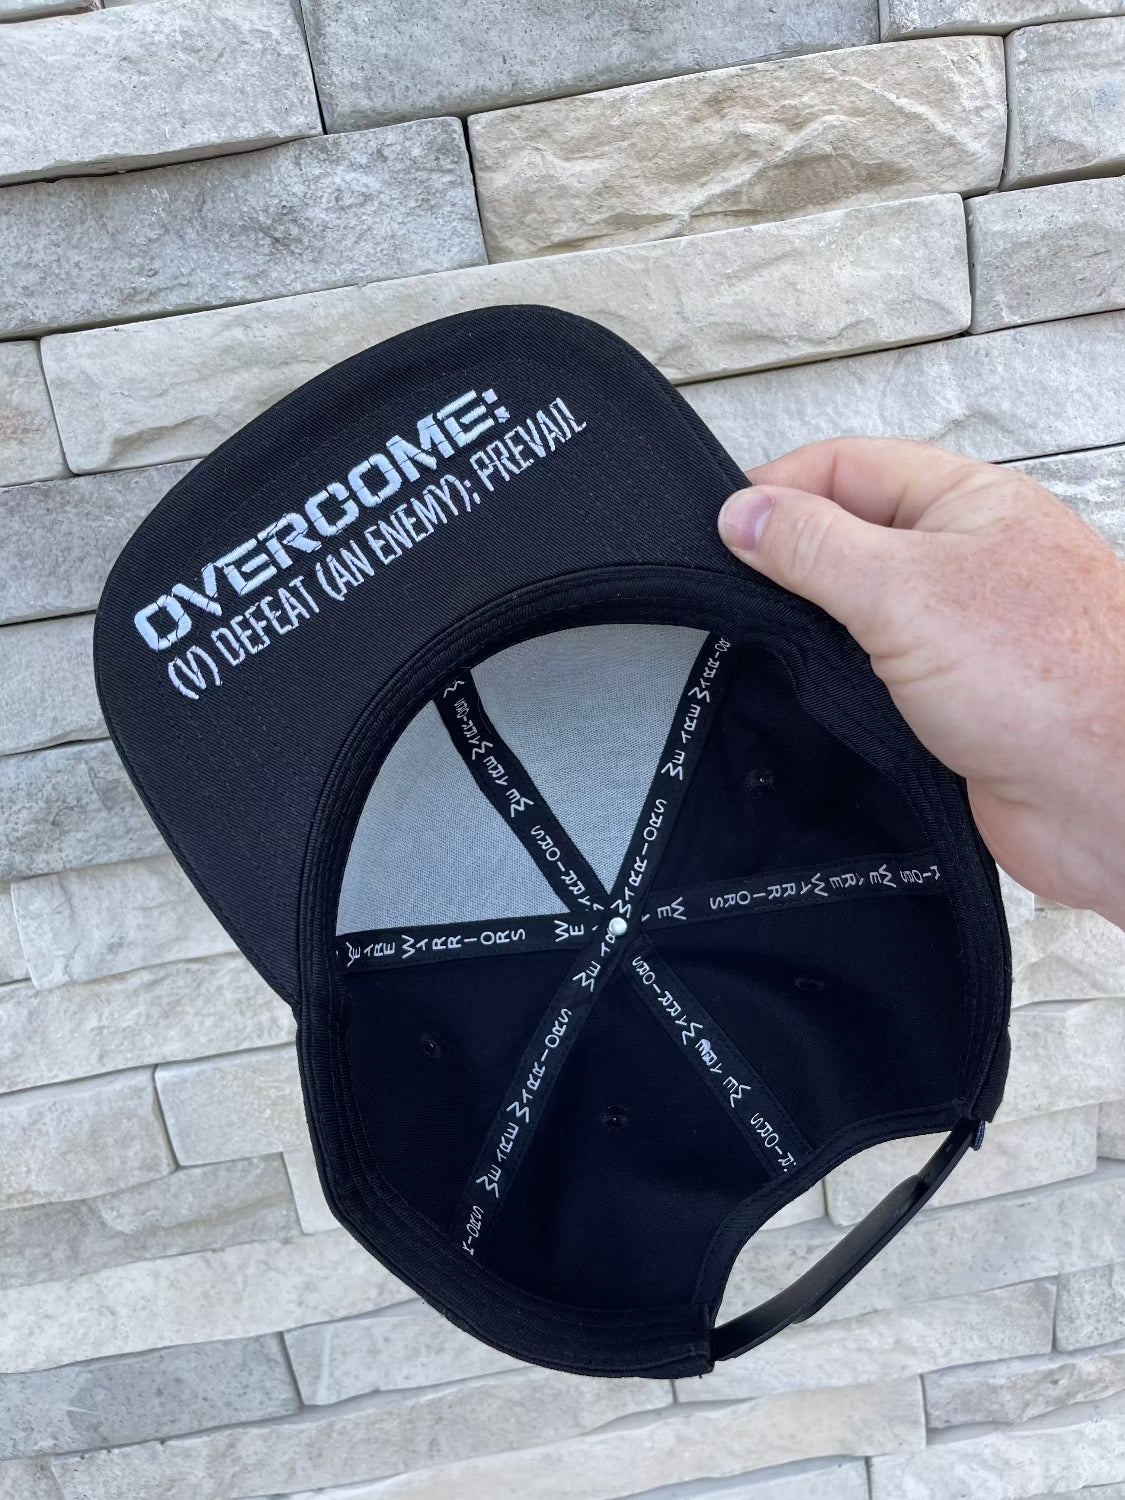 Before the Dawn hat with Overcome message, WeAreWarriorsApparel.com